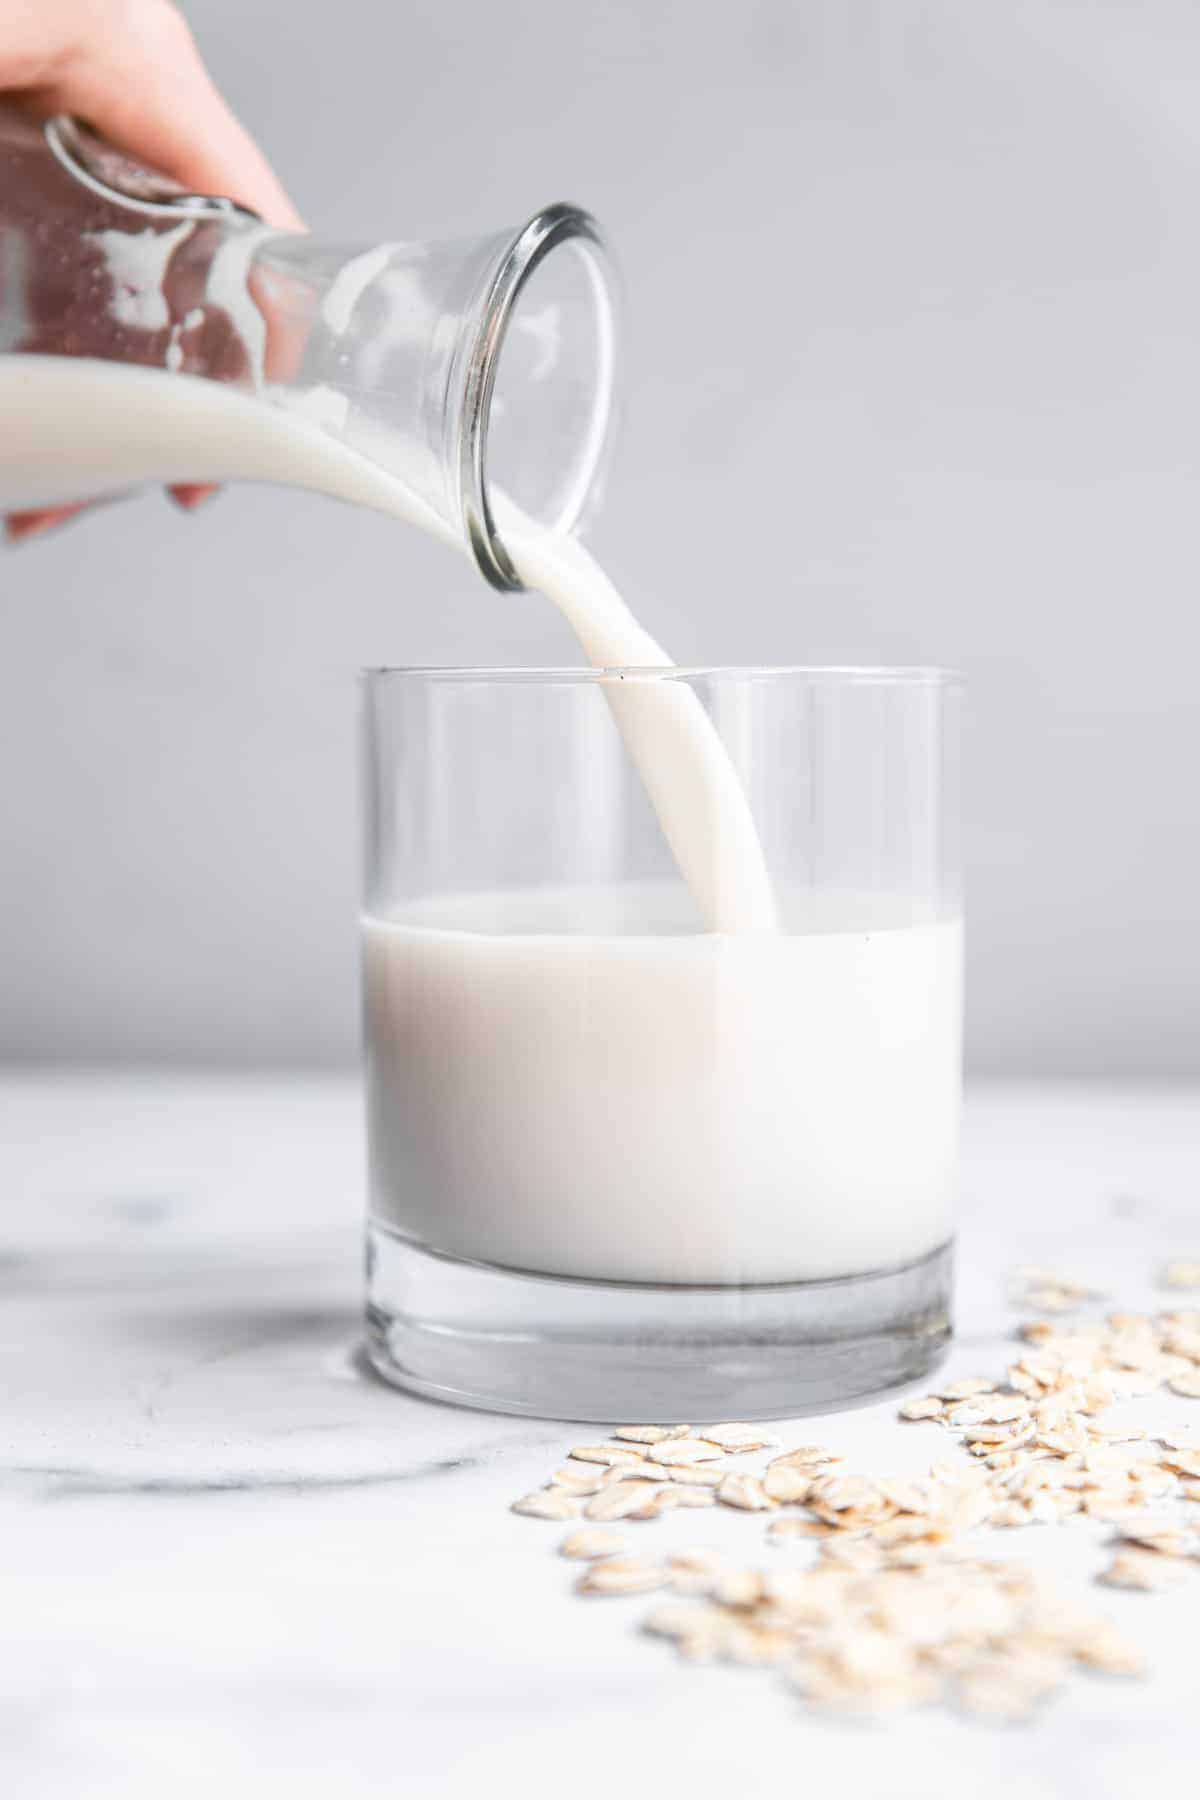 Homemade oat milk being poured into a cup